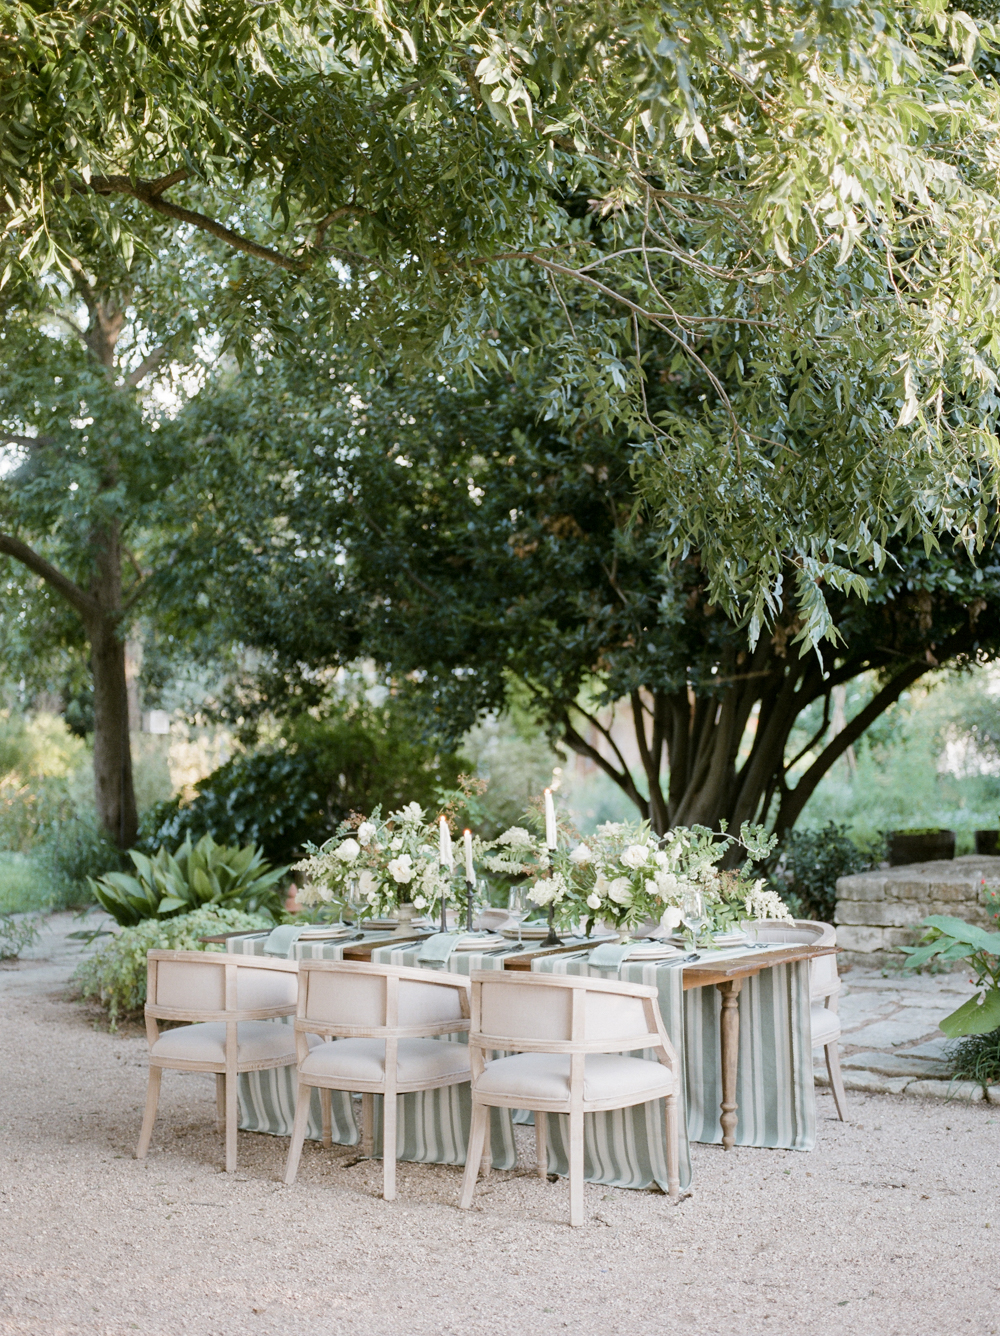 christine-gosch-barr-mansion-austin-wedding-venues-venue-simple-film-photographer-wedding-sparrow-alexandra-grecco-sprout-floals-feathers-and-frosting-classic-inspired-photography-mayhar-design18.jpg